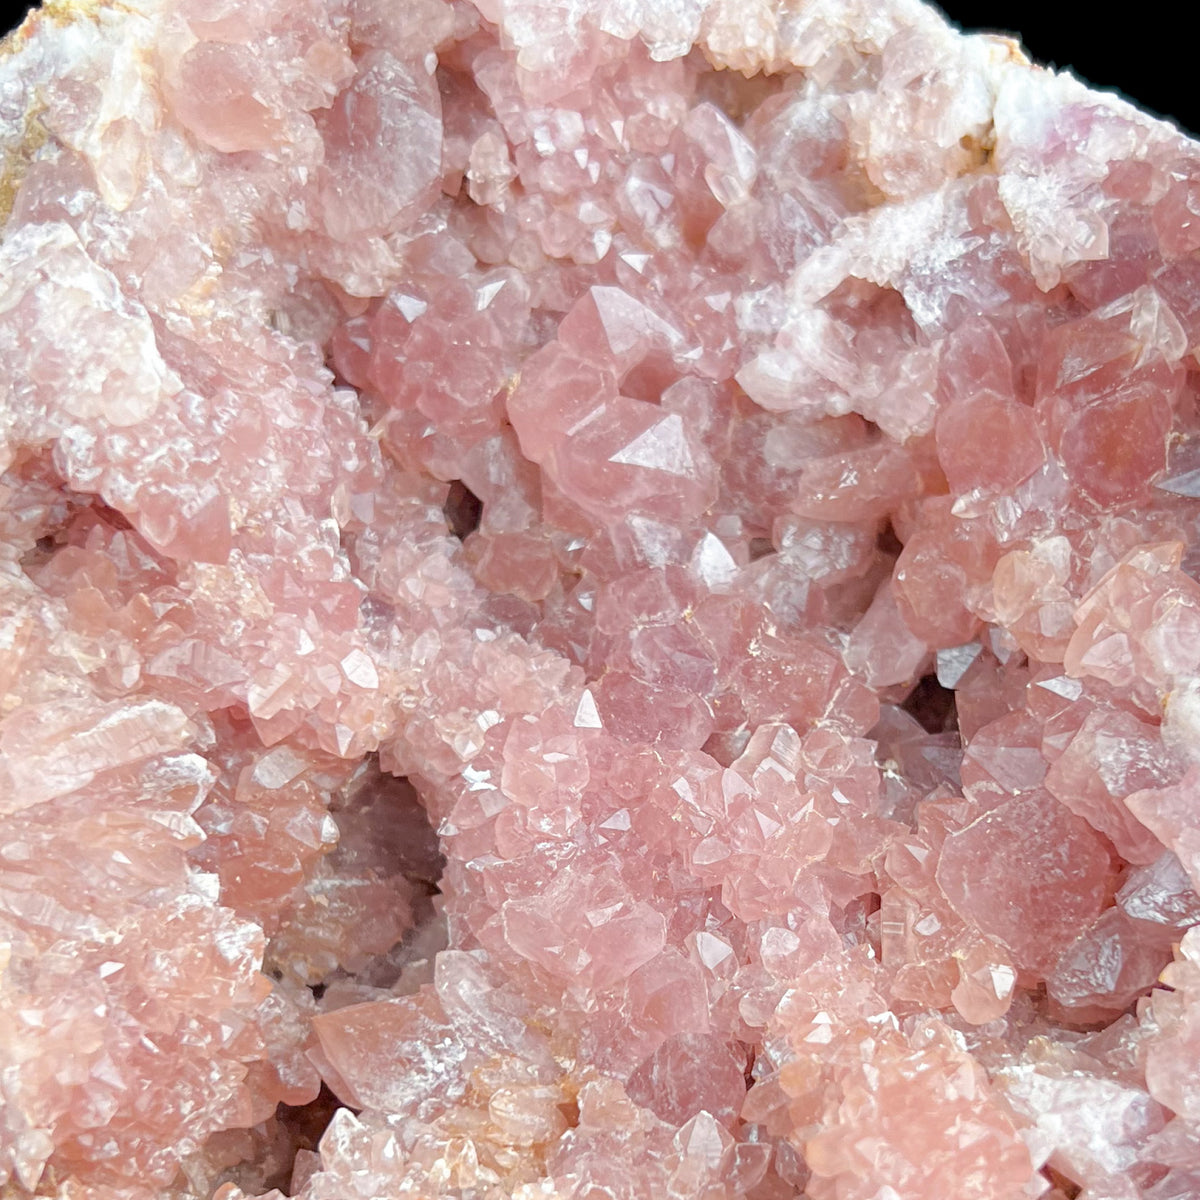 Close up of Pink Amethyst Crystals inside a Geode